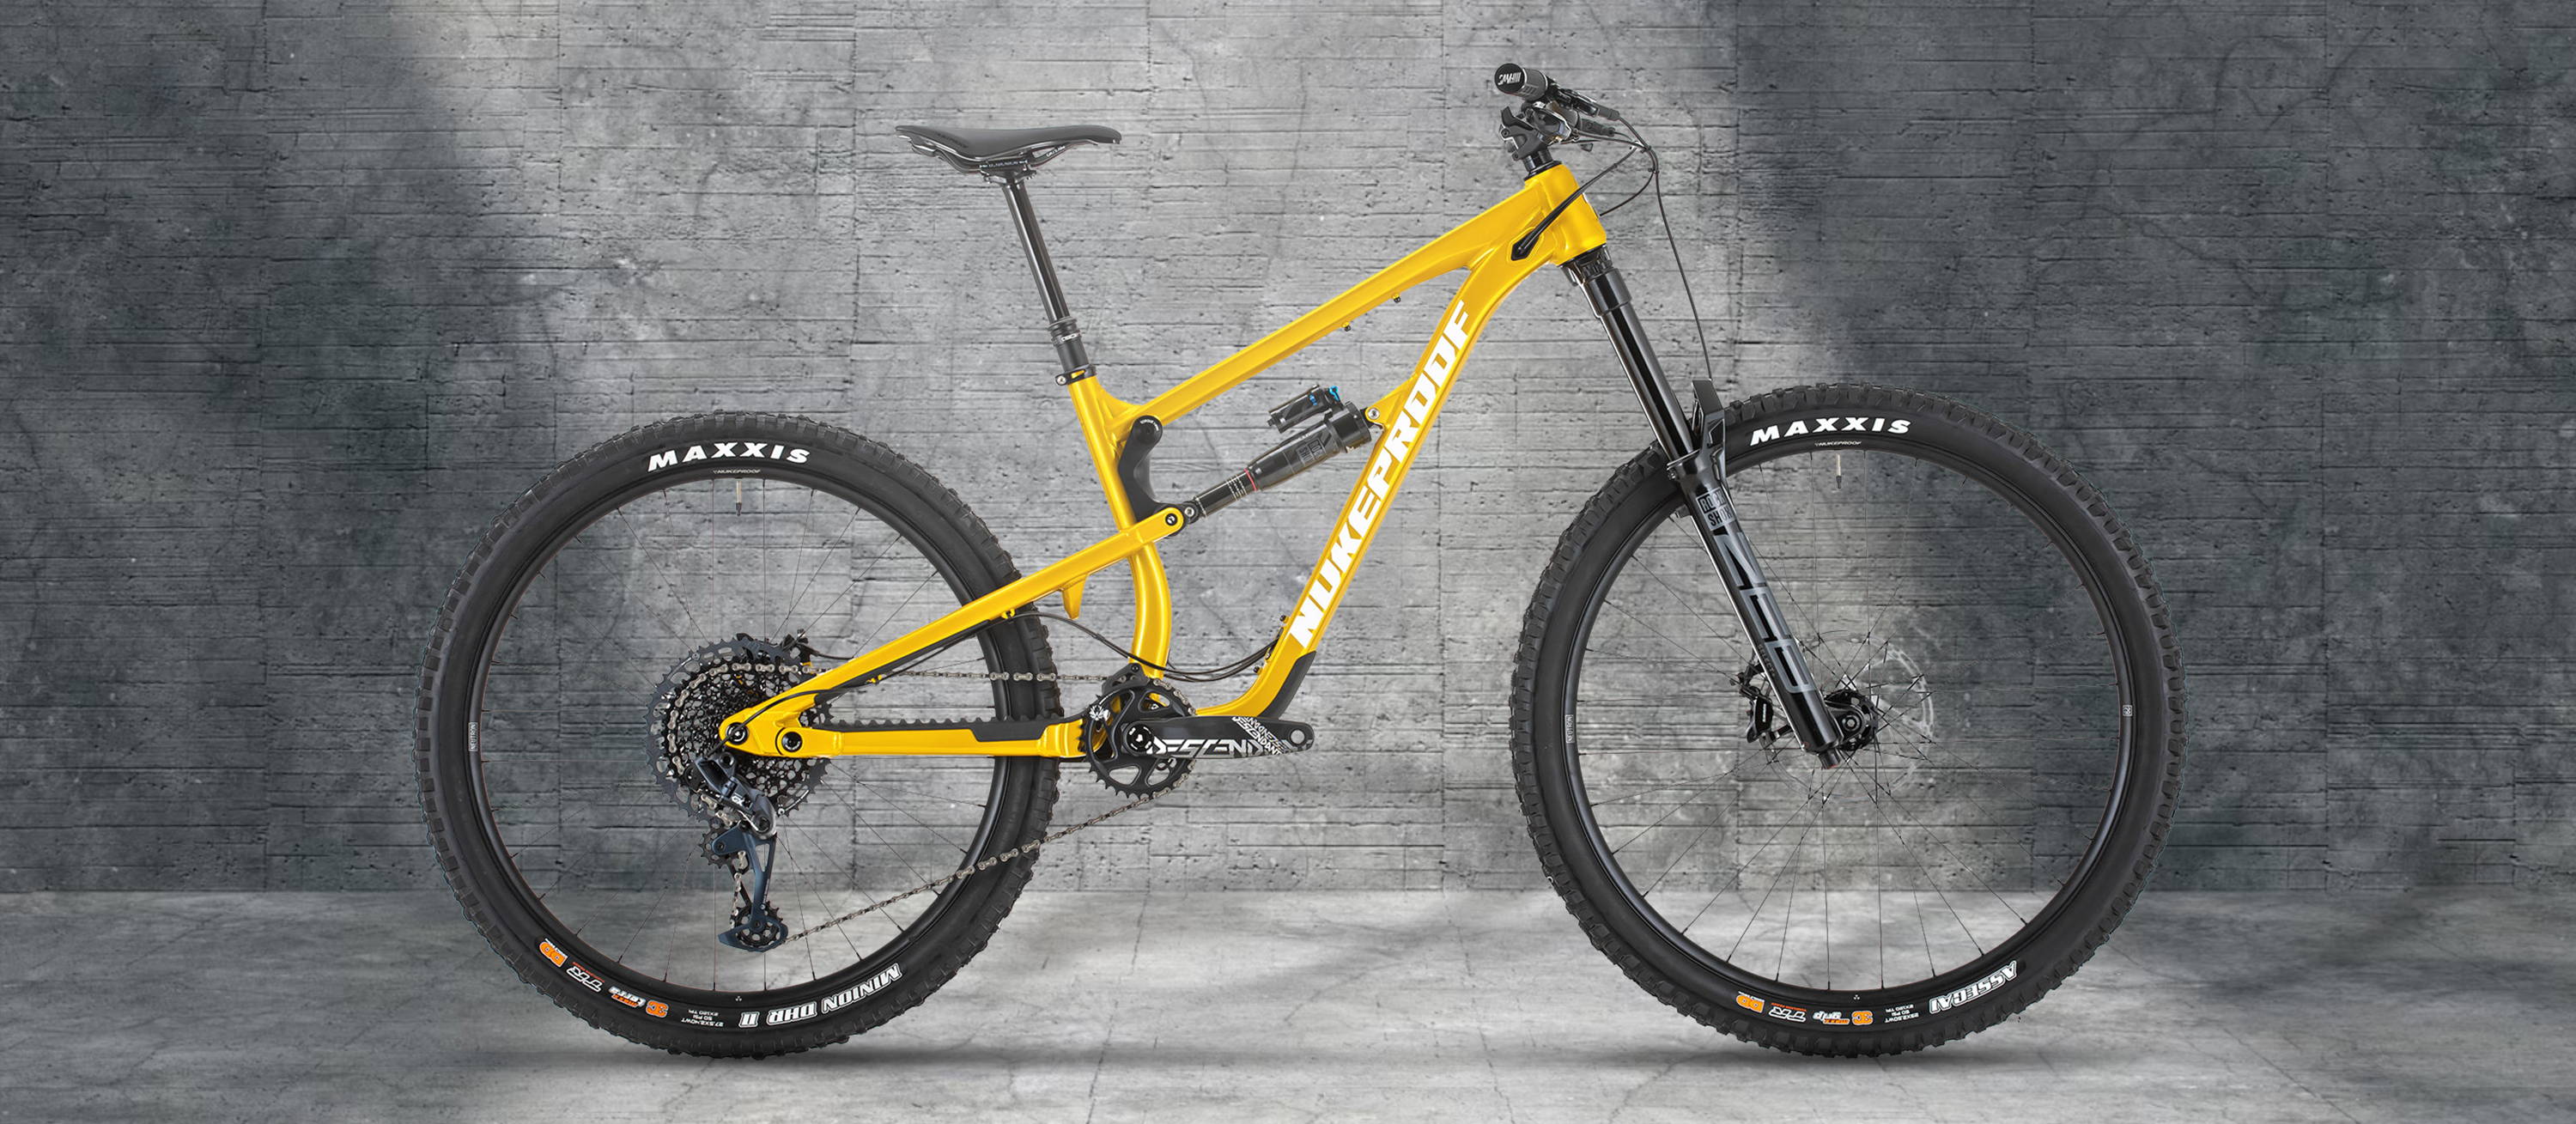 Fresh new Nukeproof Mega Alloy specifications released